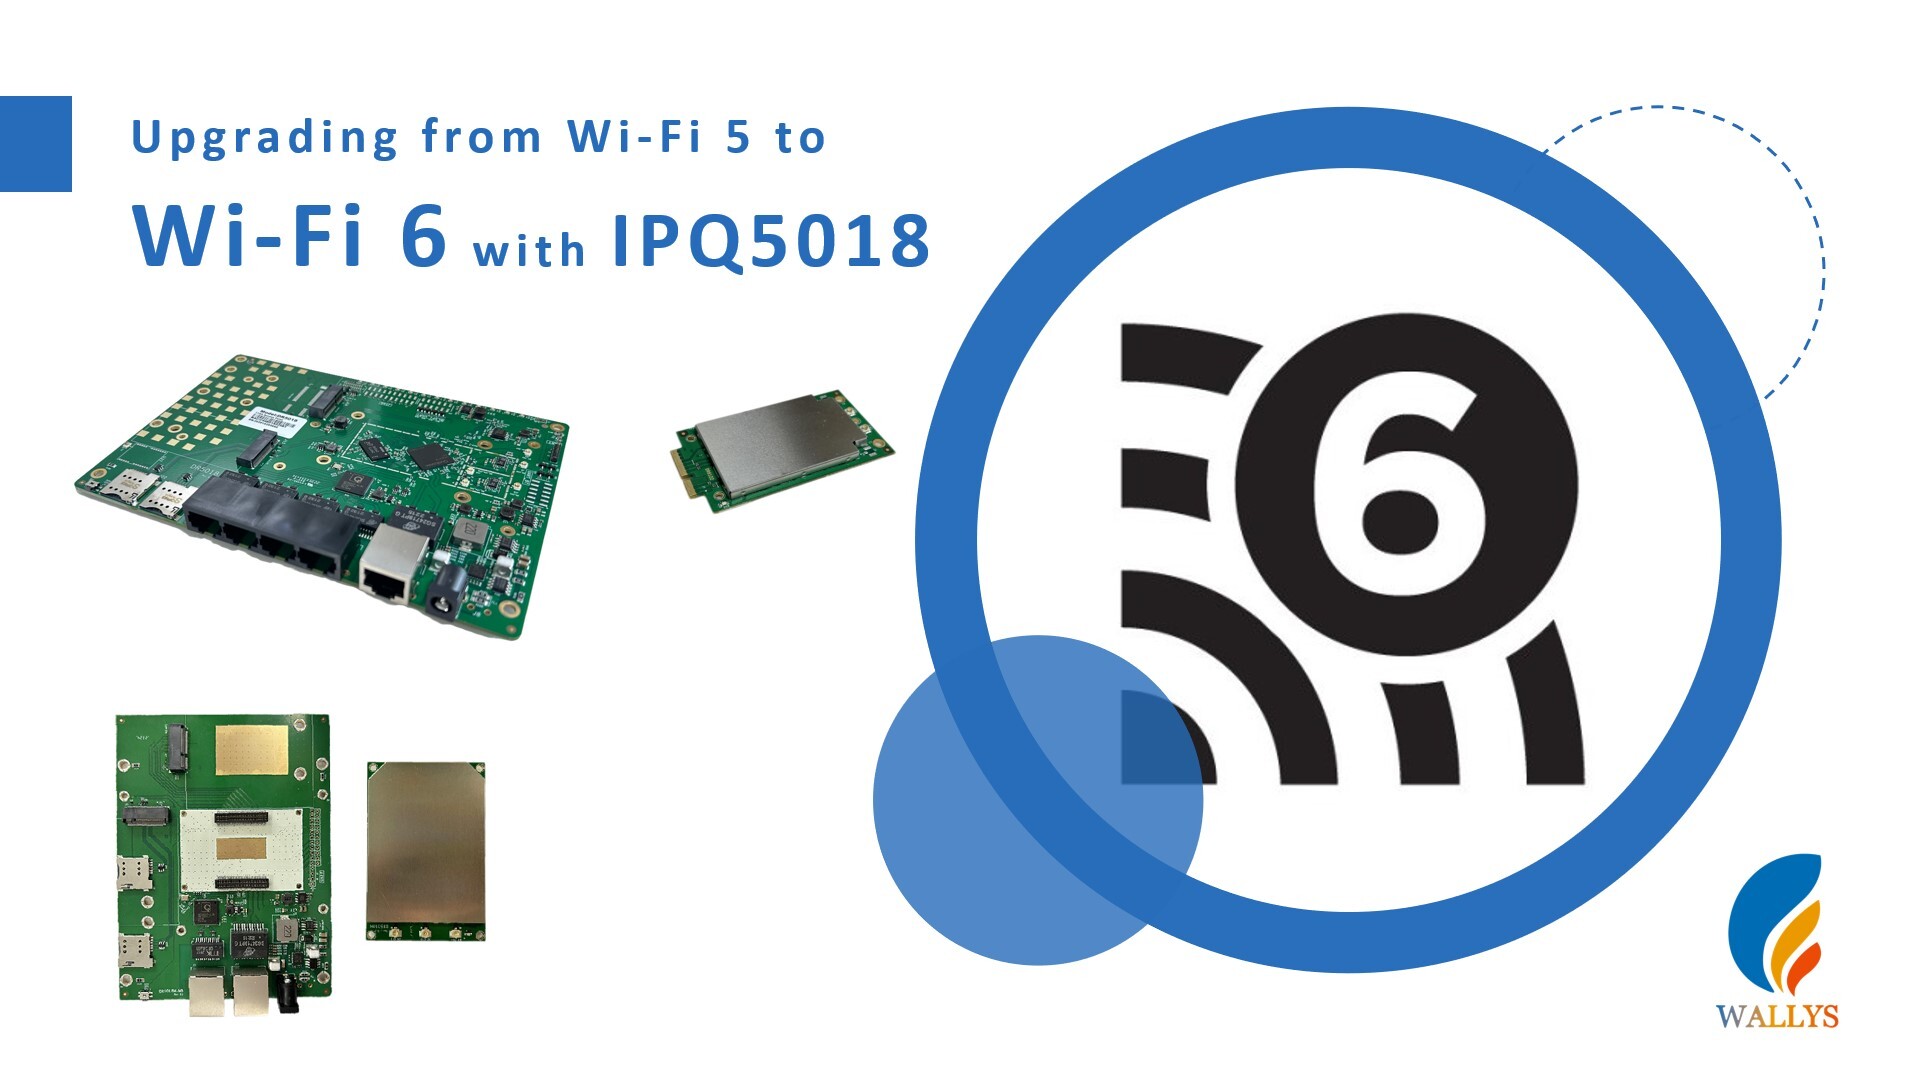 Upgrading from WiFi 5 to WiFi 6 with IPQ5018